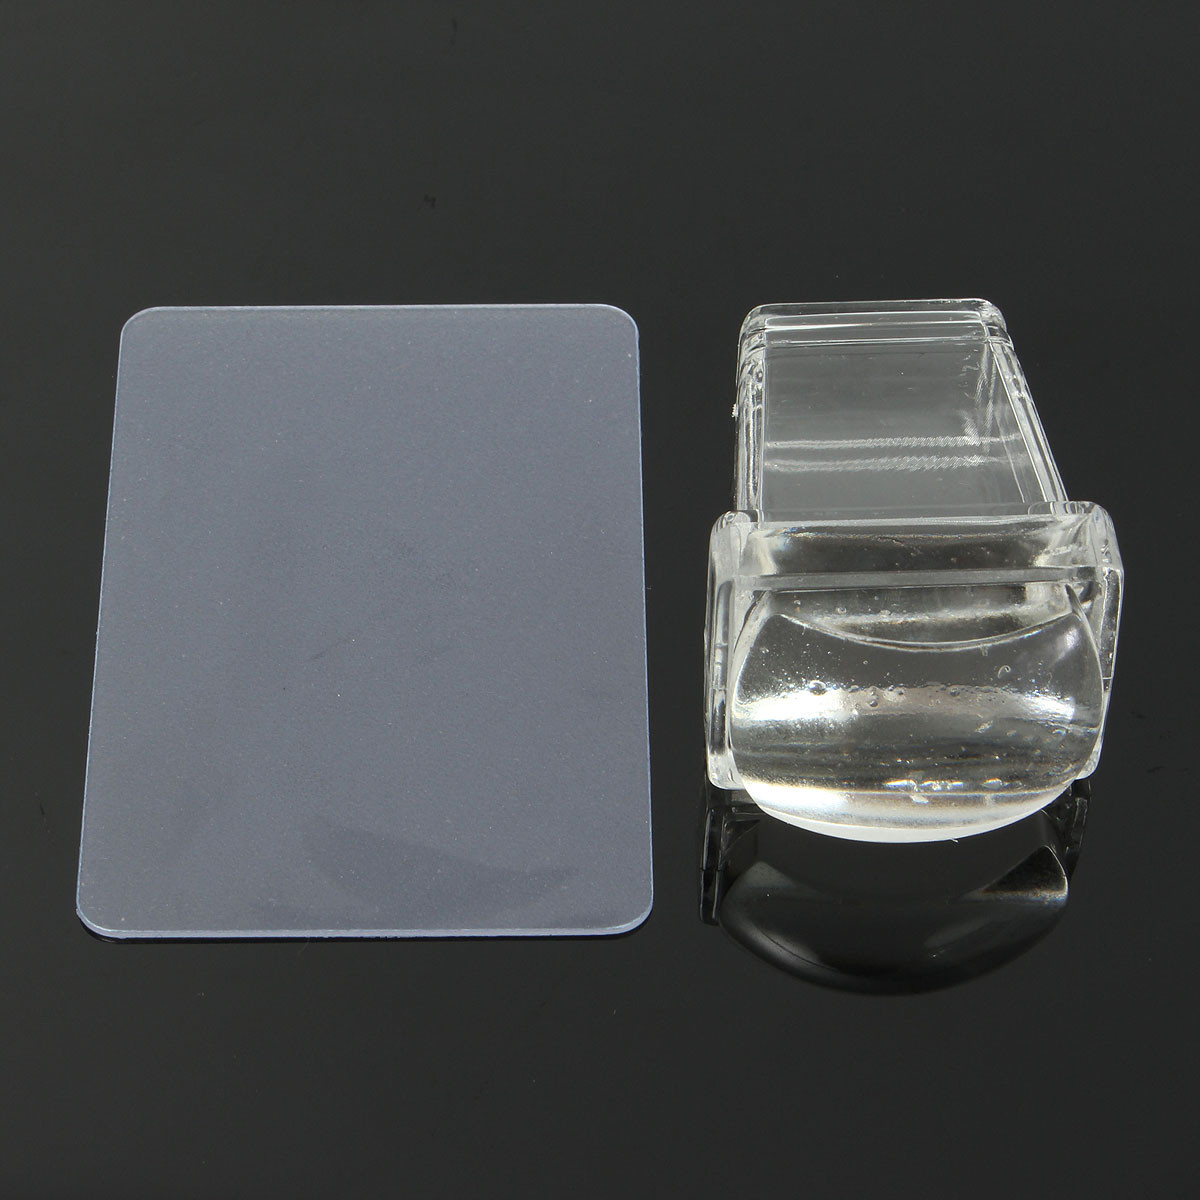 Clear-Soft-Silicone-Nail-Stamping-Template-Printer-Set-Scraper-Image-Plate-Transfer-Tools-DIY-Design-1110281